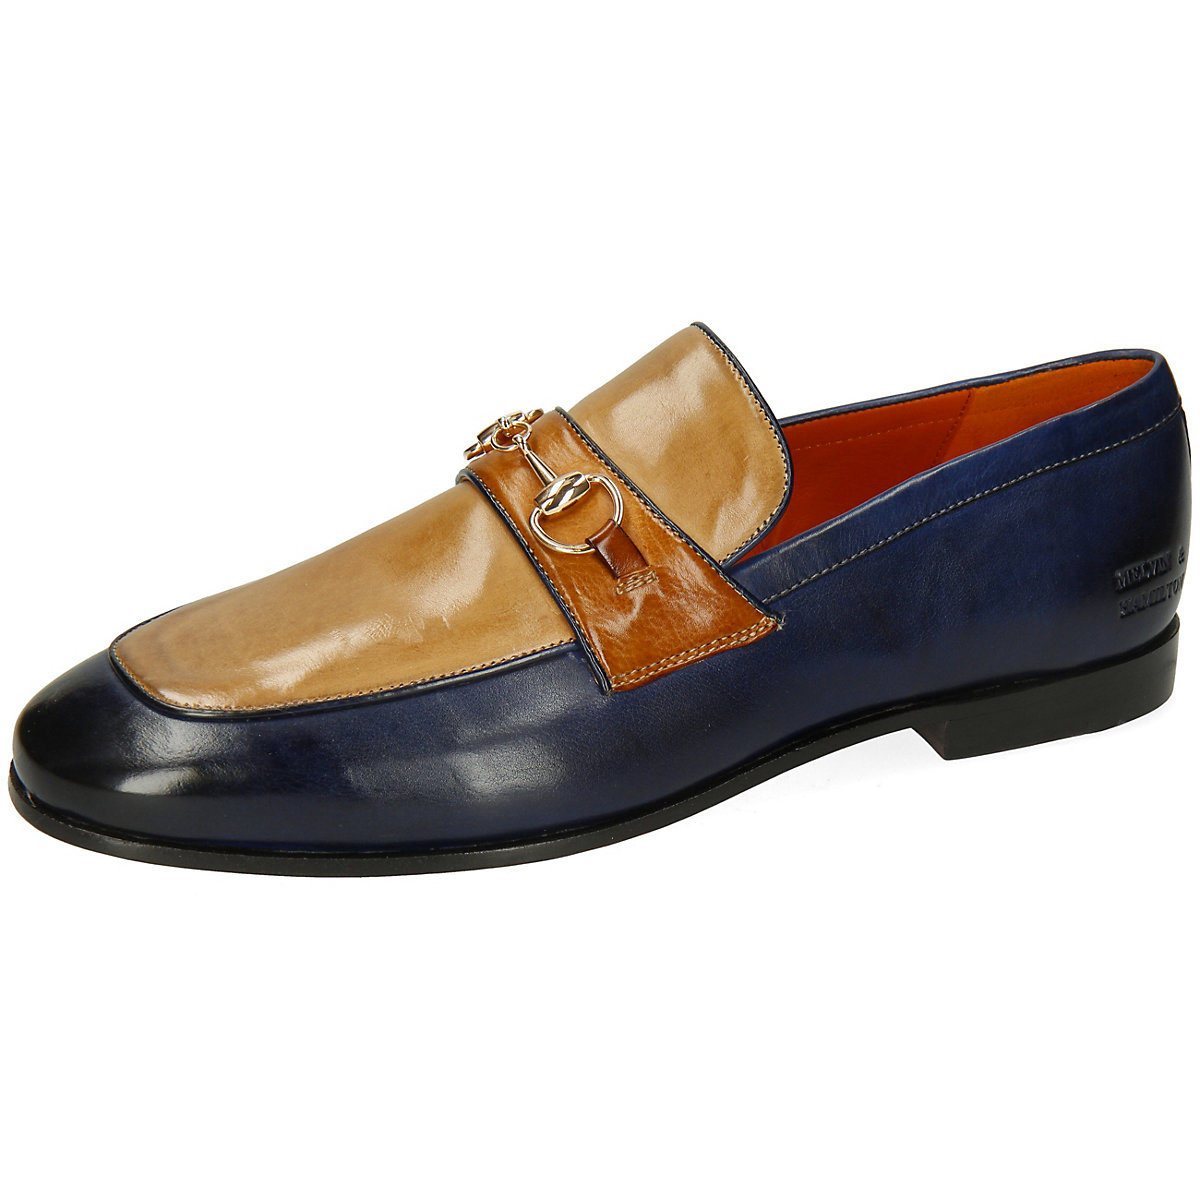 MELVIN & HAMILTON Clive 29 Loafers Loafers mehrfarbig